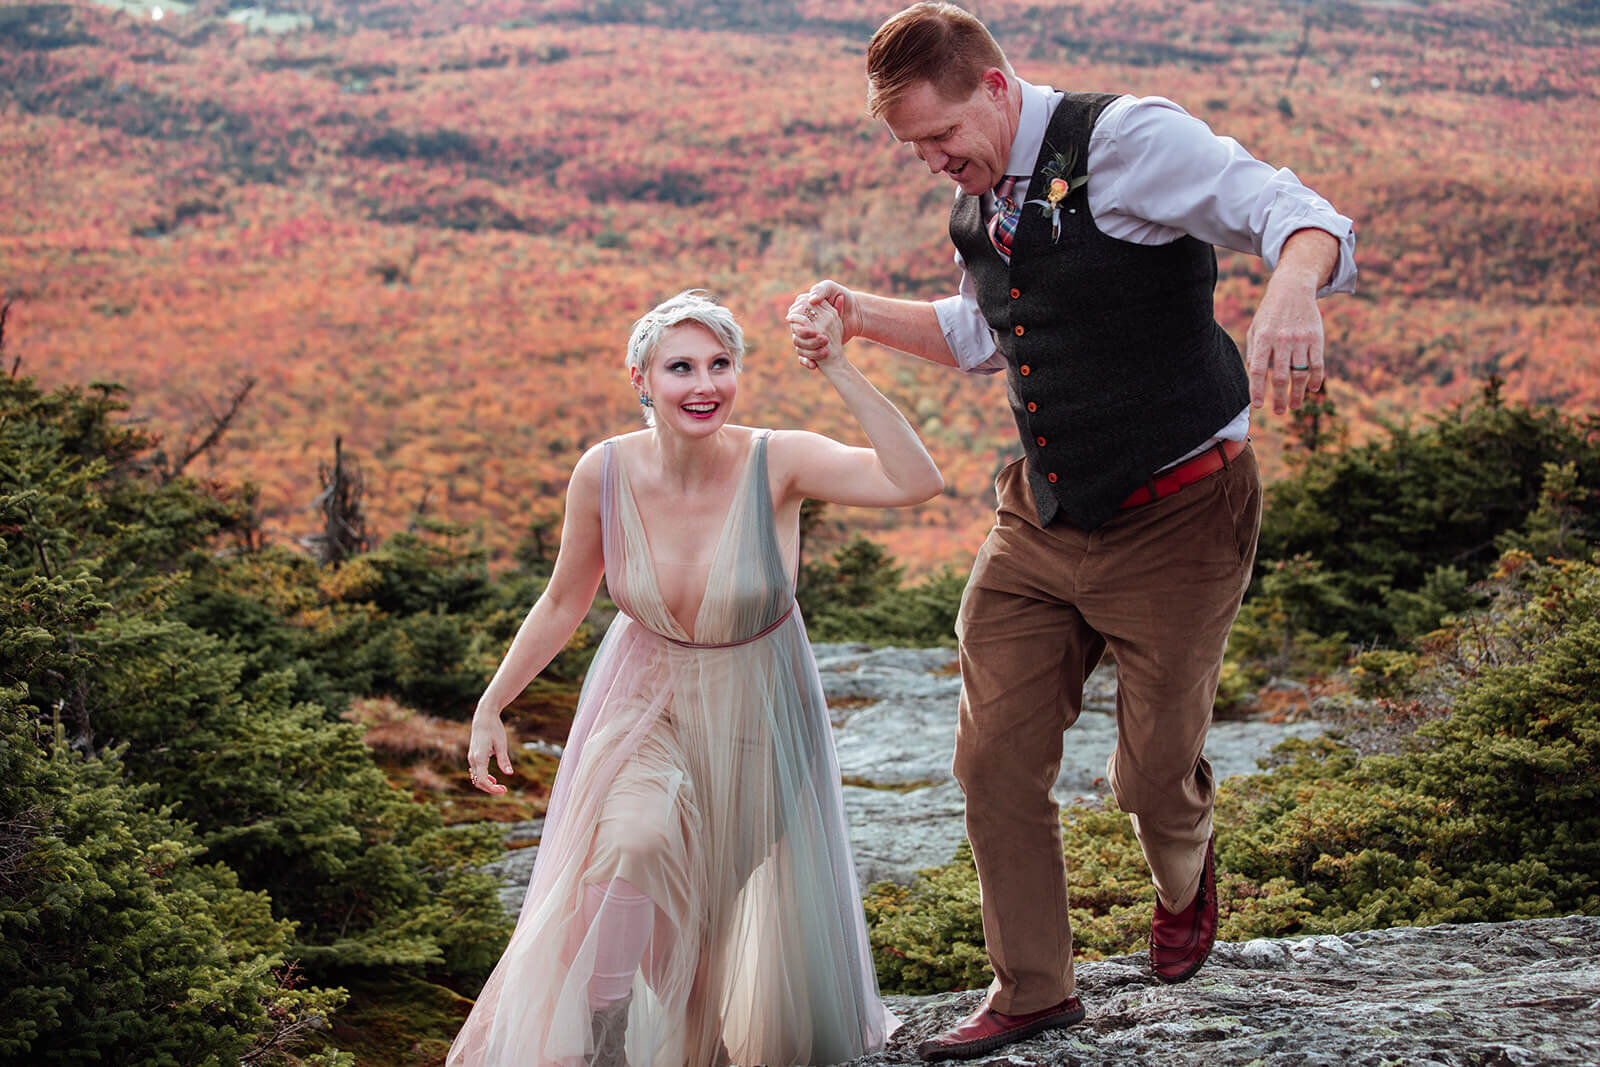  Brides dress flows in the wind as she and the groom enjoy a moment on summit of Mt. Mansfield near Stowe, Vermont after their elopement 